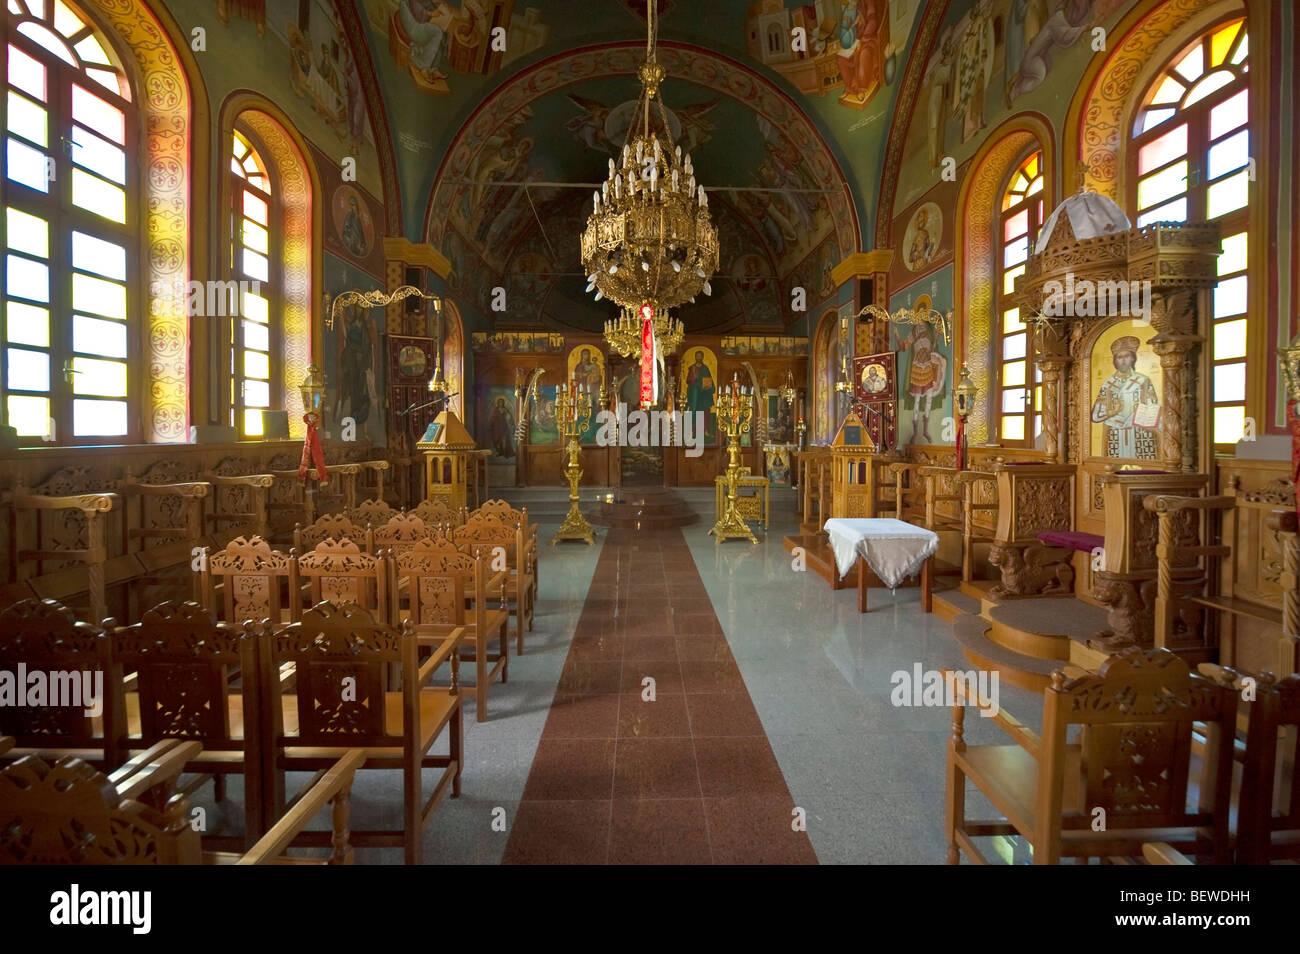 Interior view of the Church of St. Mary at Lagoudi, Cos, Greece, vanishing point Stock Photo